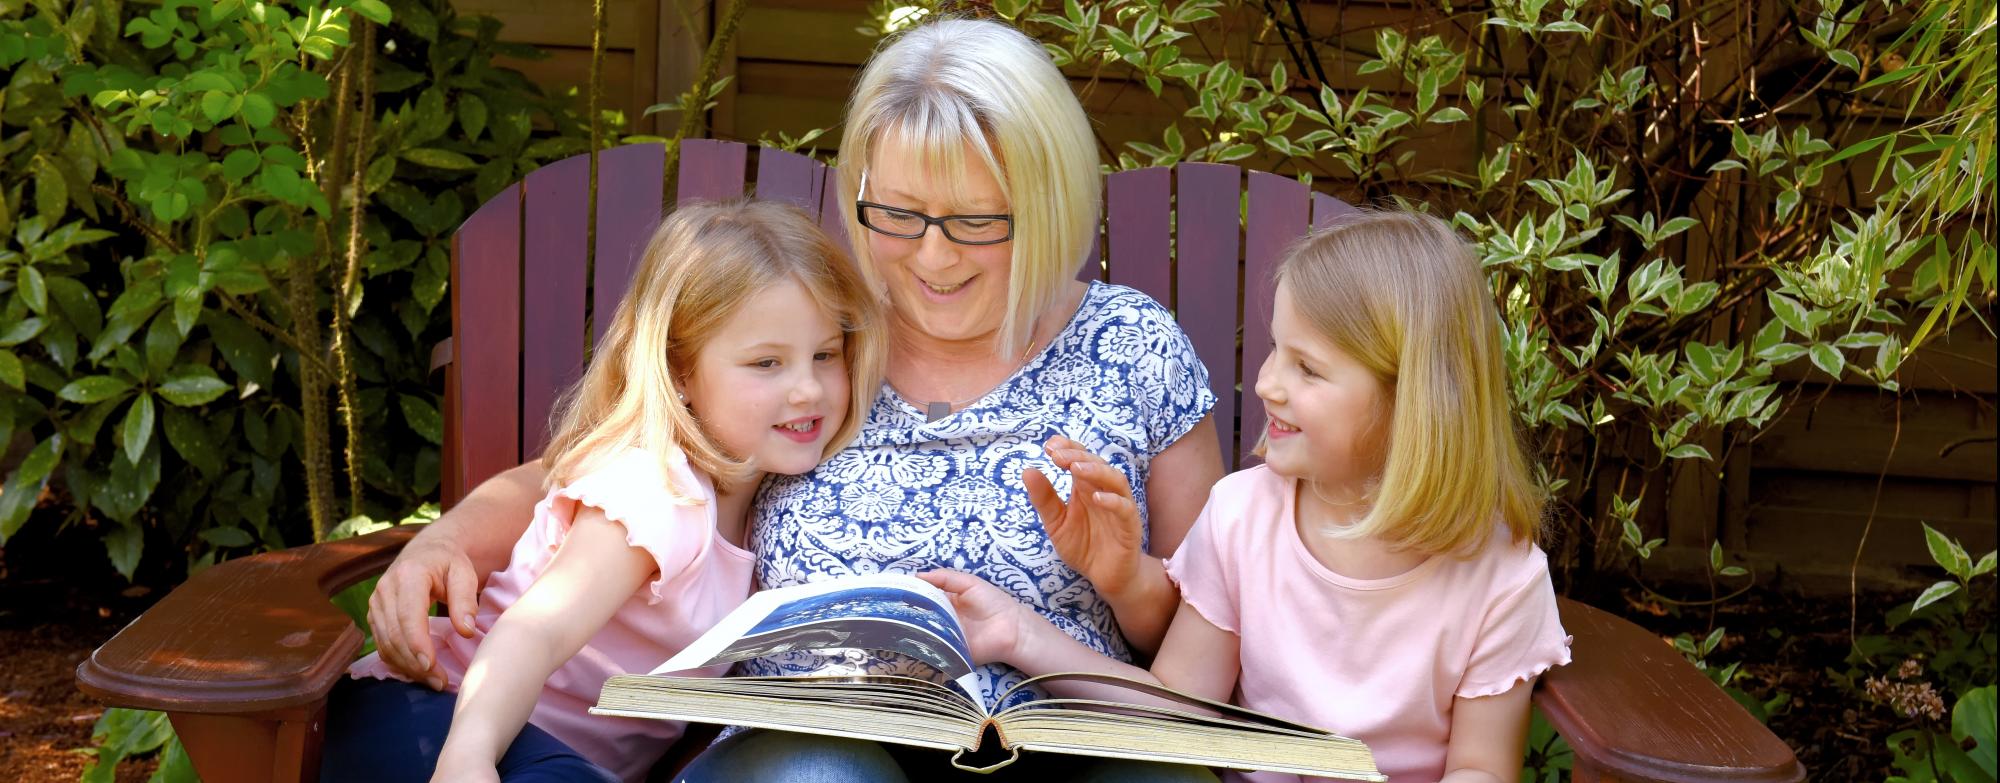 Image of Grandparent with two grandchildren looking at a book